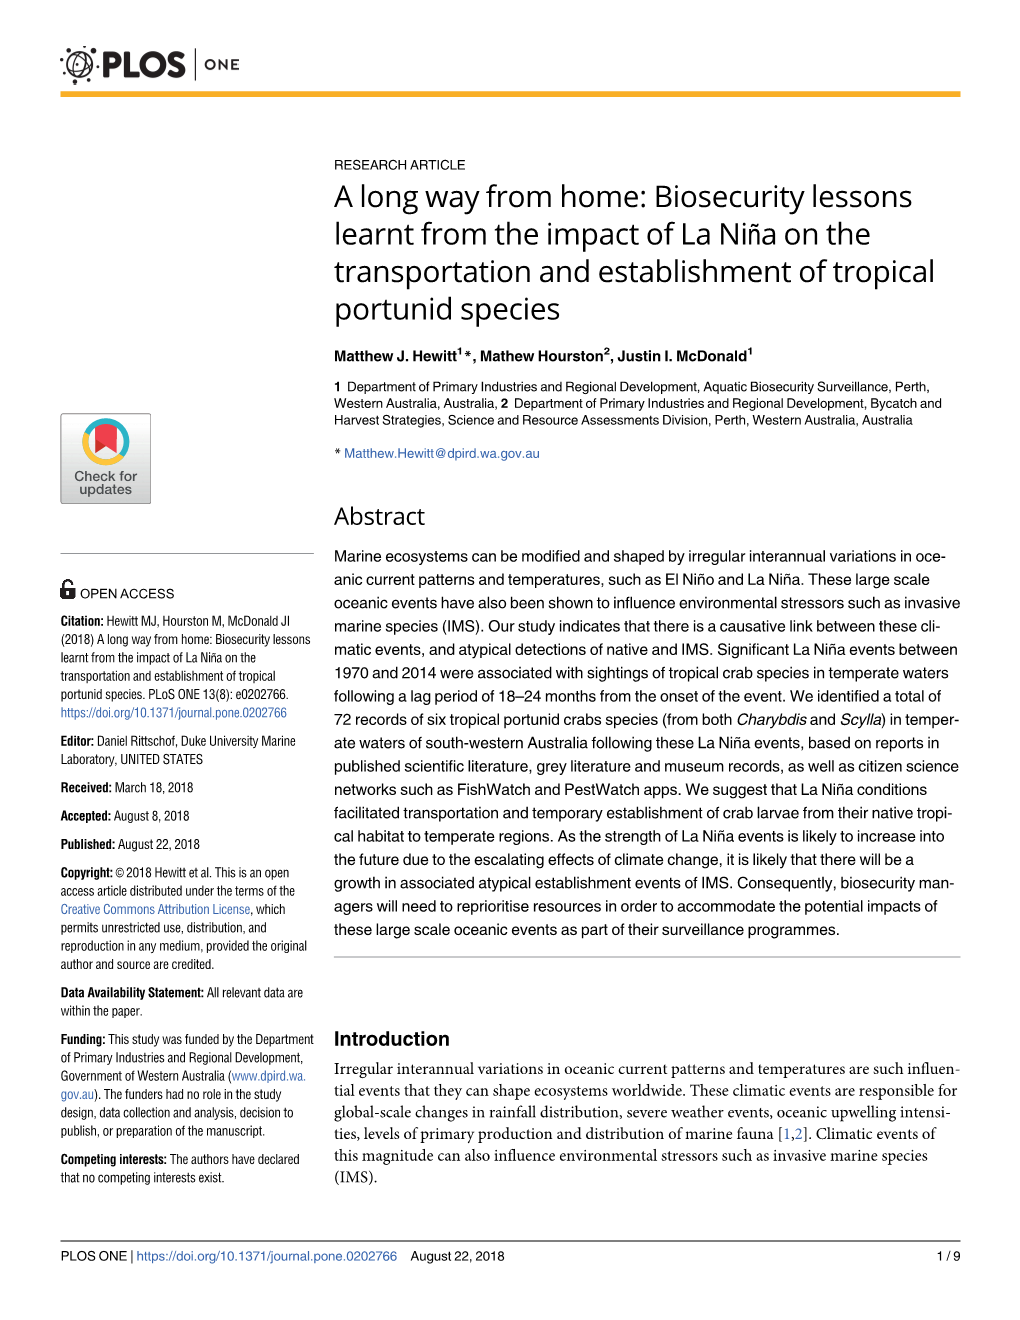 Biosecurity Lessons Learnt from the Impact of La Niña on the Transportation and Establishment of Tropical Portunid Species